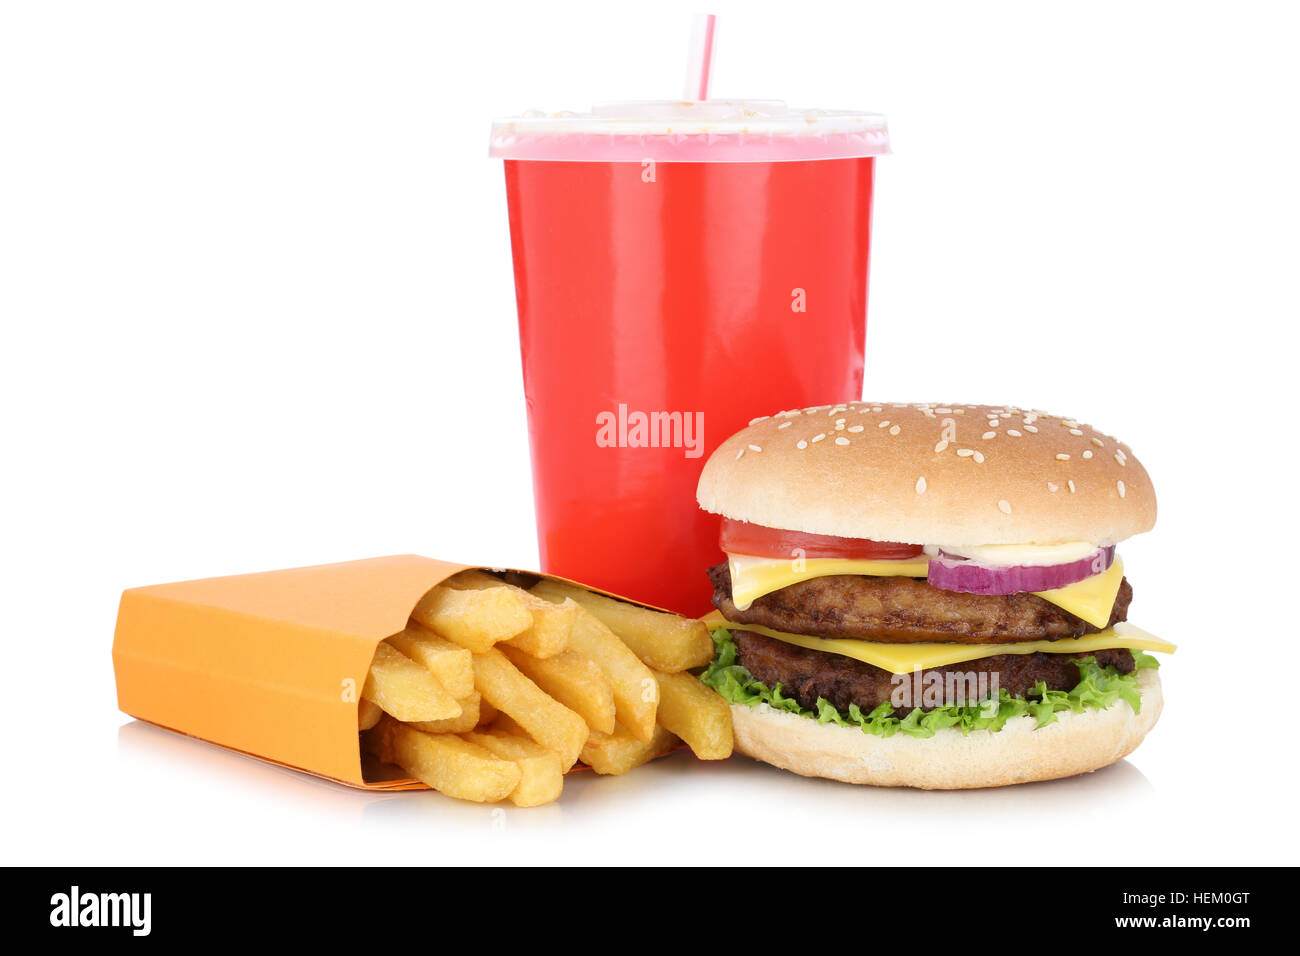 Double cheeseburger hamburger and fries menu meal combo drink isolated on a white background Stock Photo